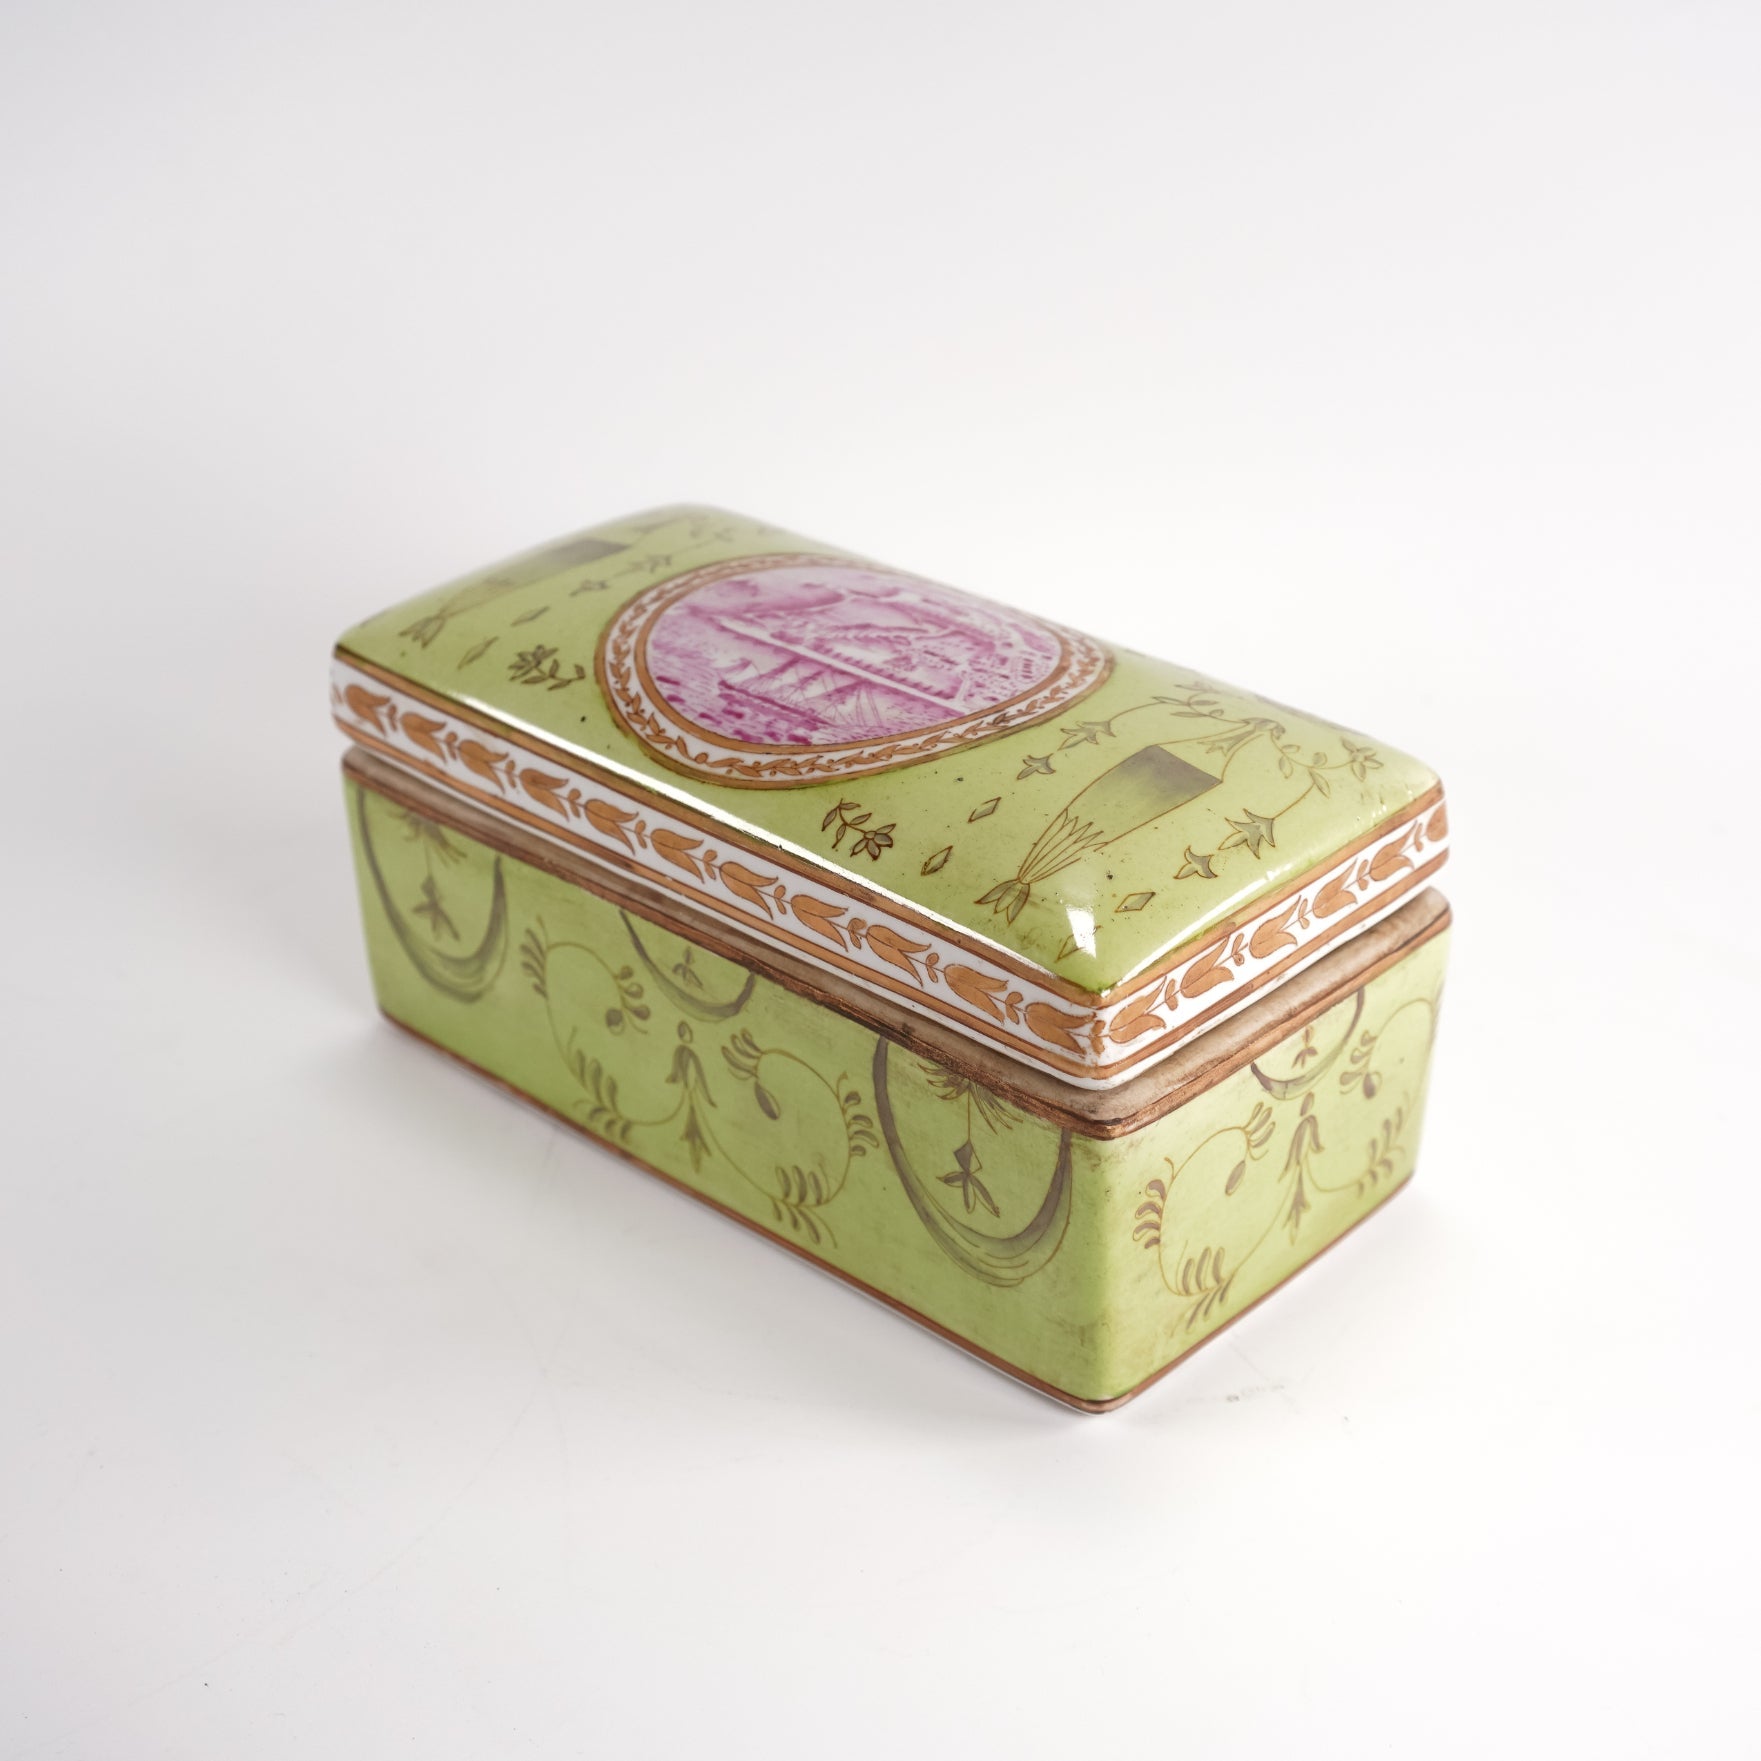 Antique Porcelain Hand Painted Box - Sirdab - Unknown